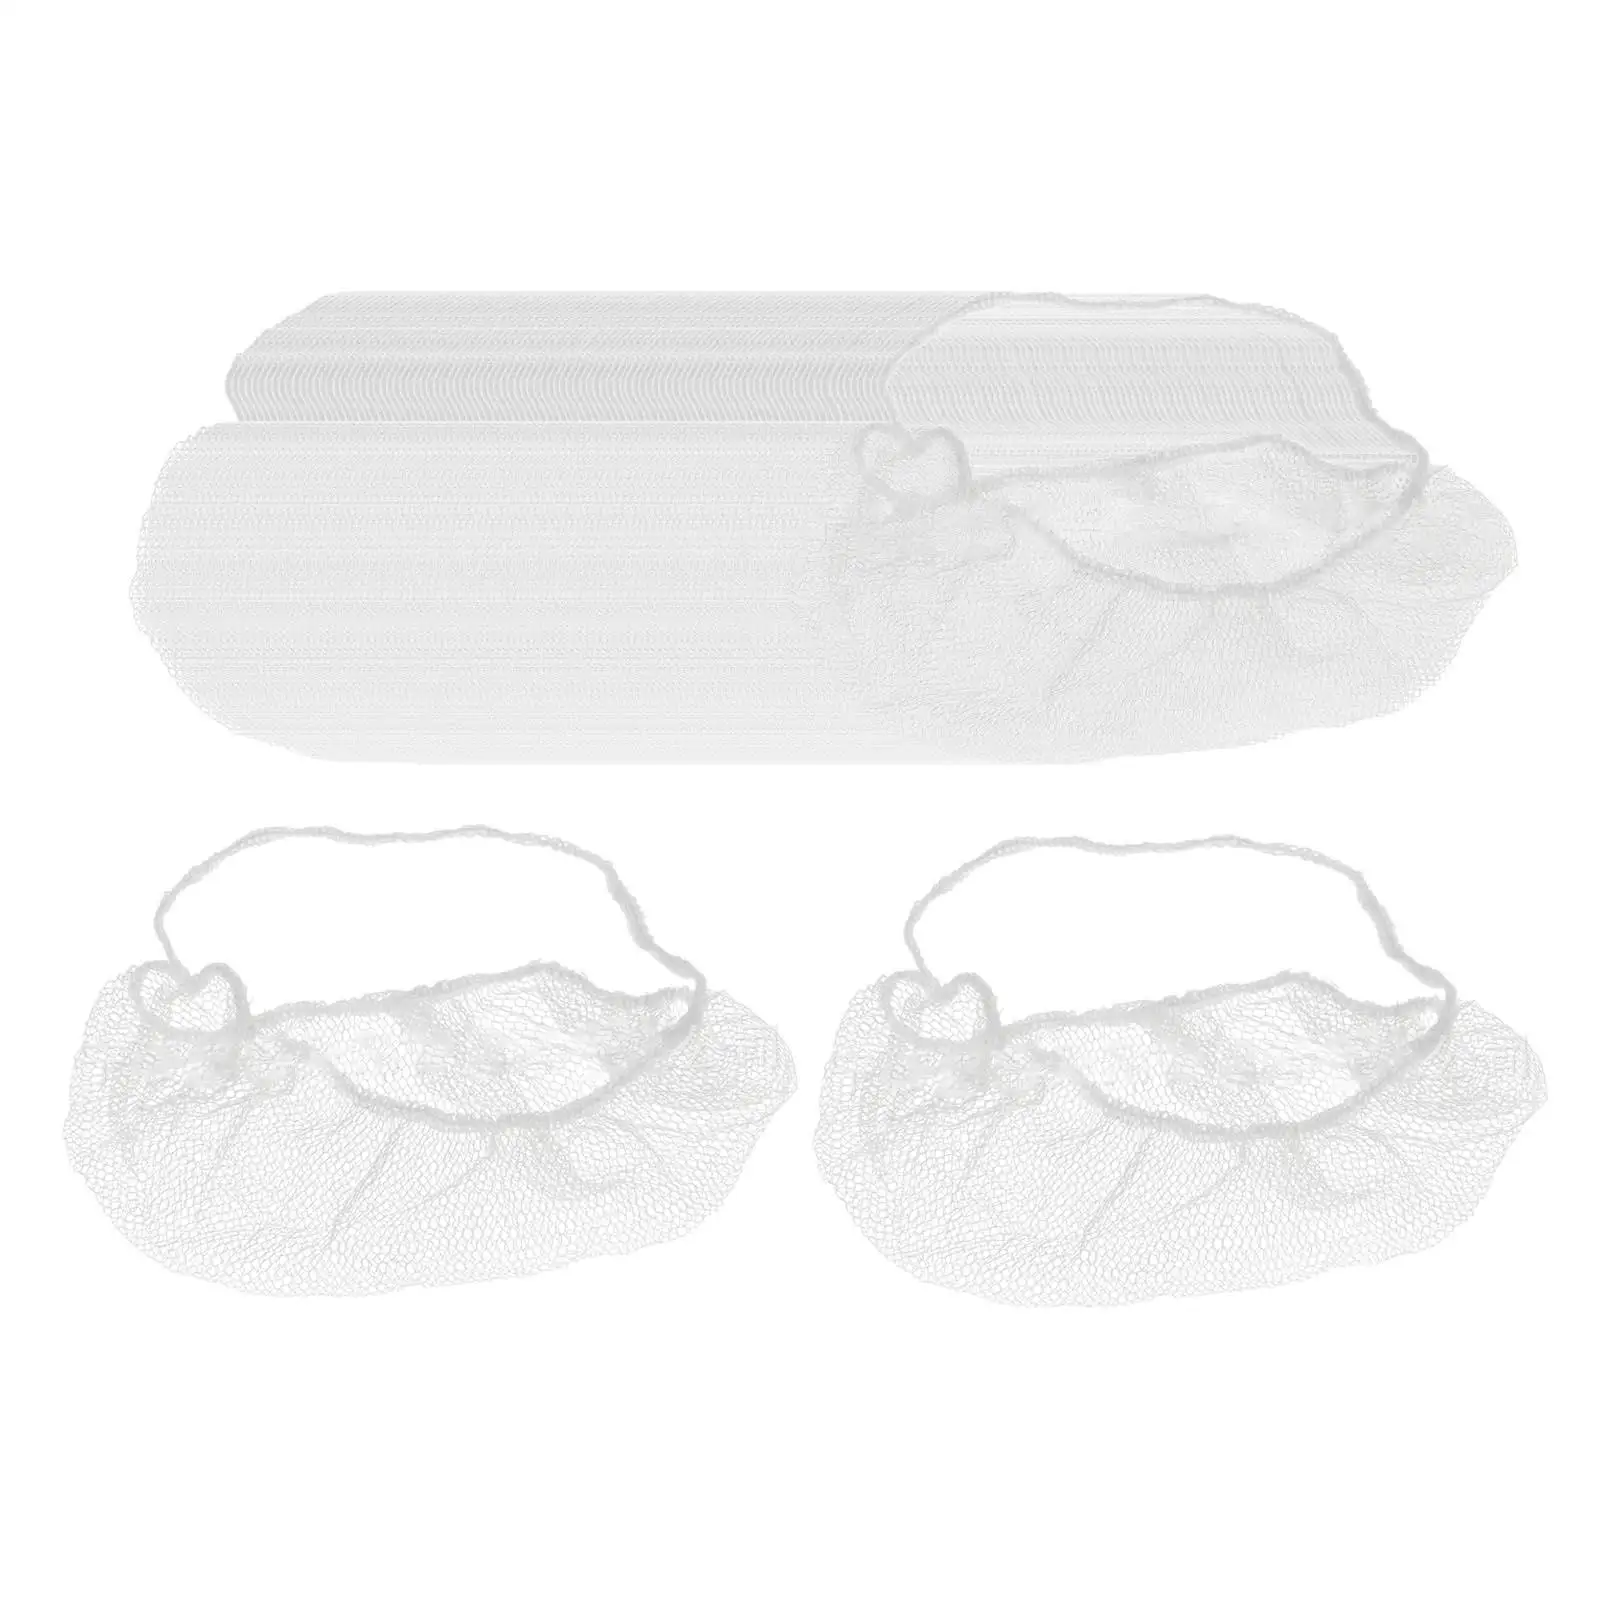 100Pcs Beard Nets Protective Beard Covers for Restaurants and Cleaning Companies Accessories Soft Material Size 45cm